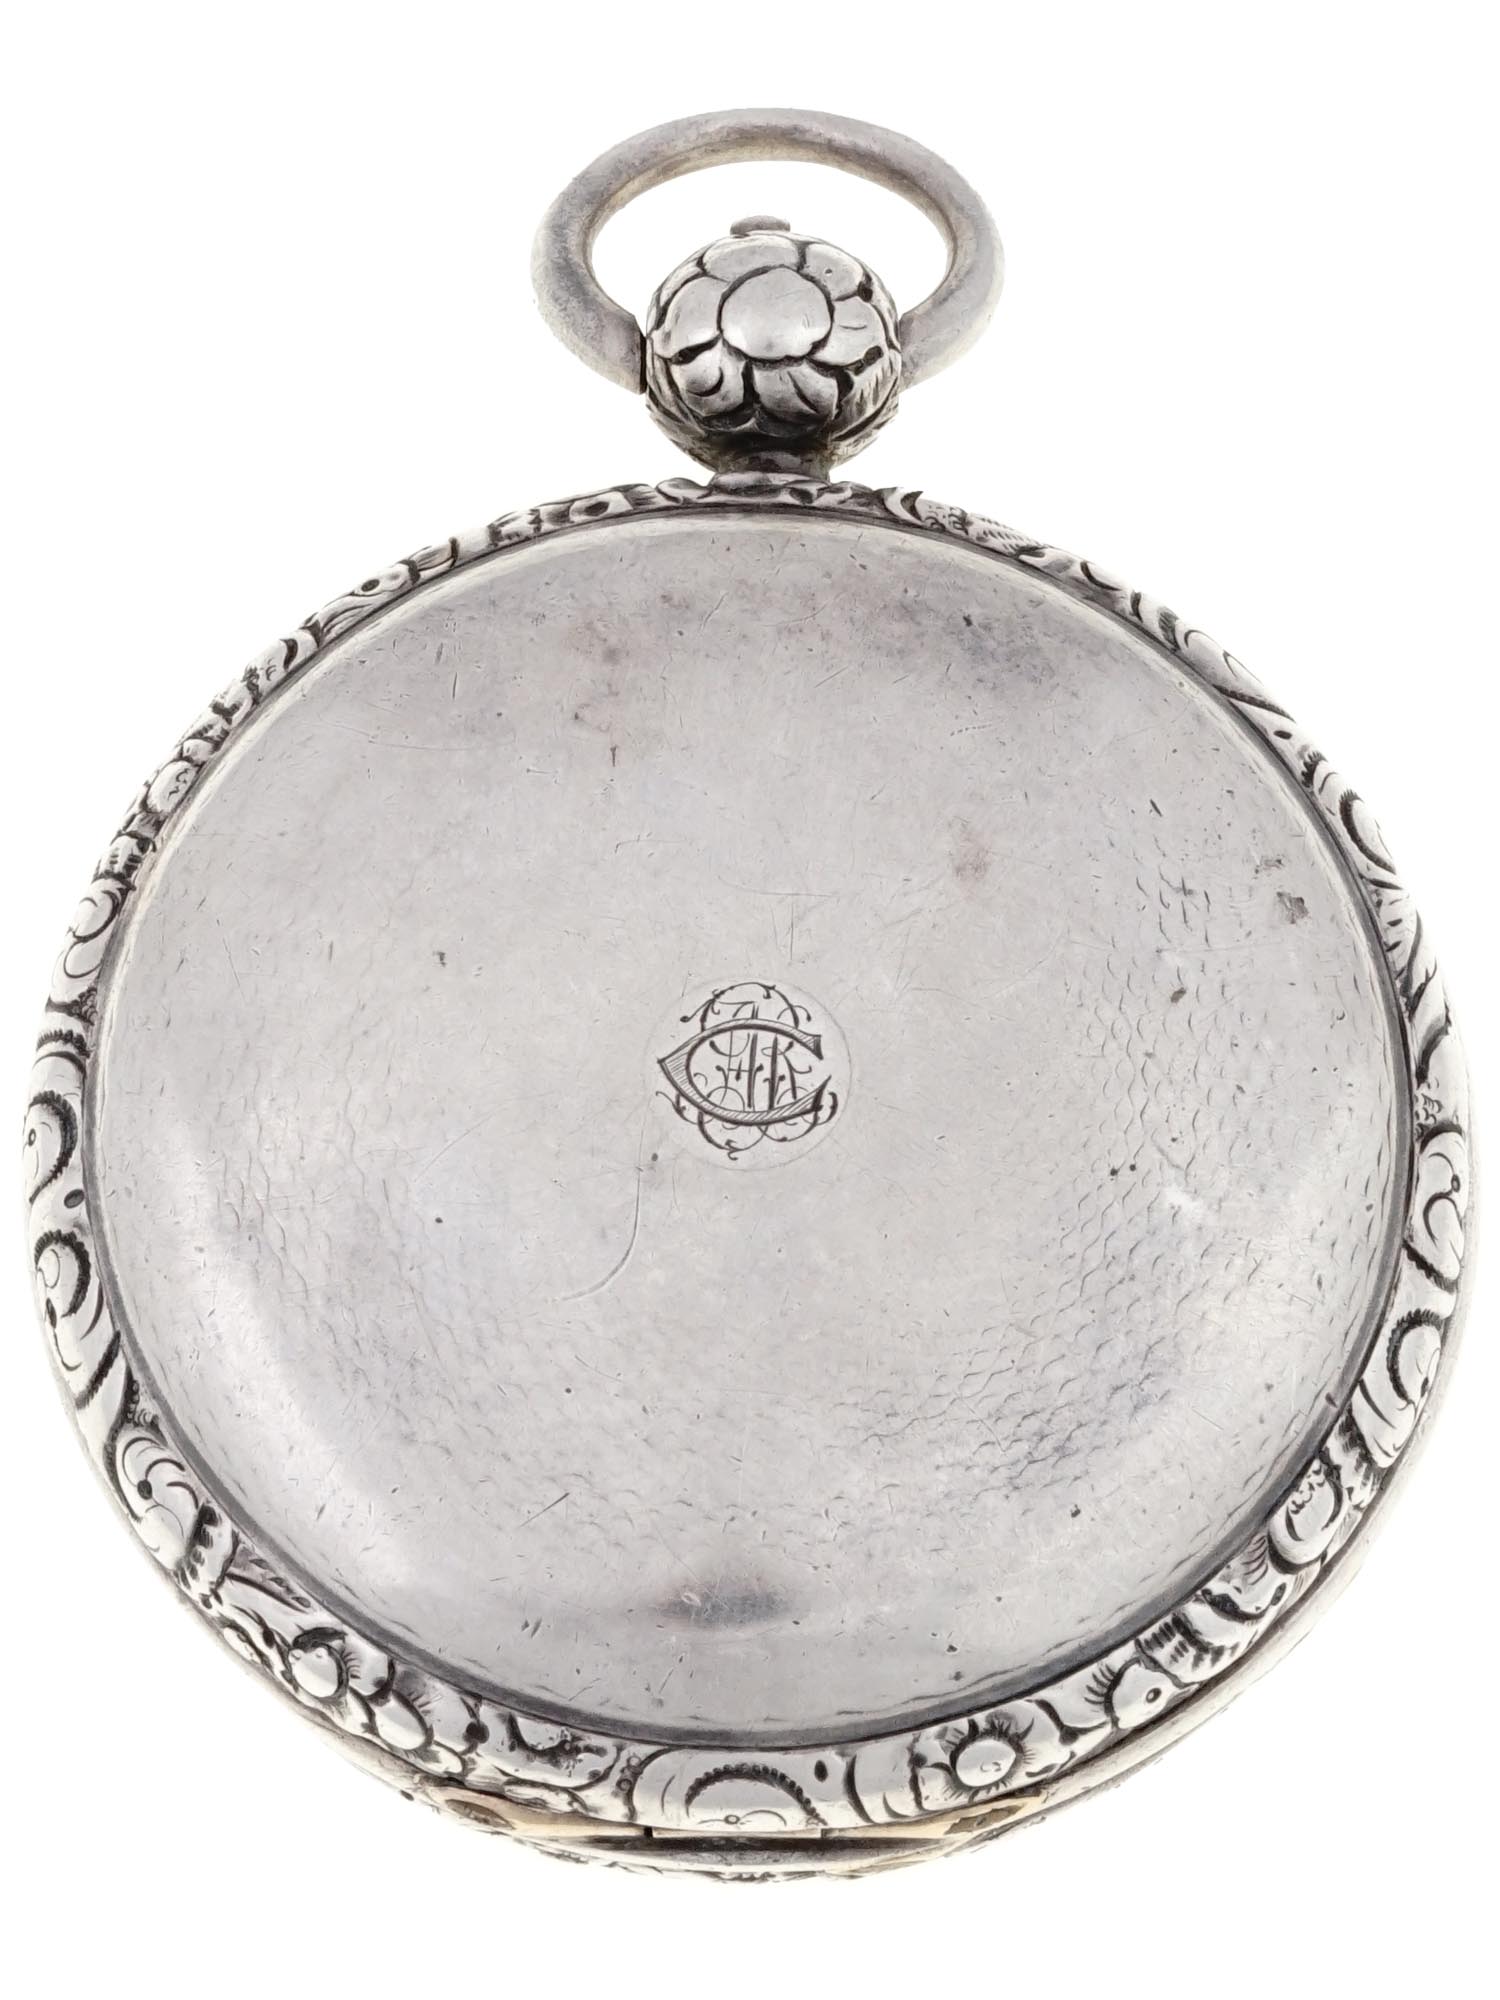 ANTIQUE ENGLISH SILVER DOUBLE HUNTER POCKET WATCH PIC-1